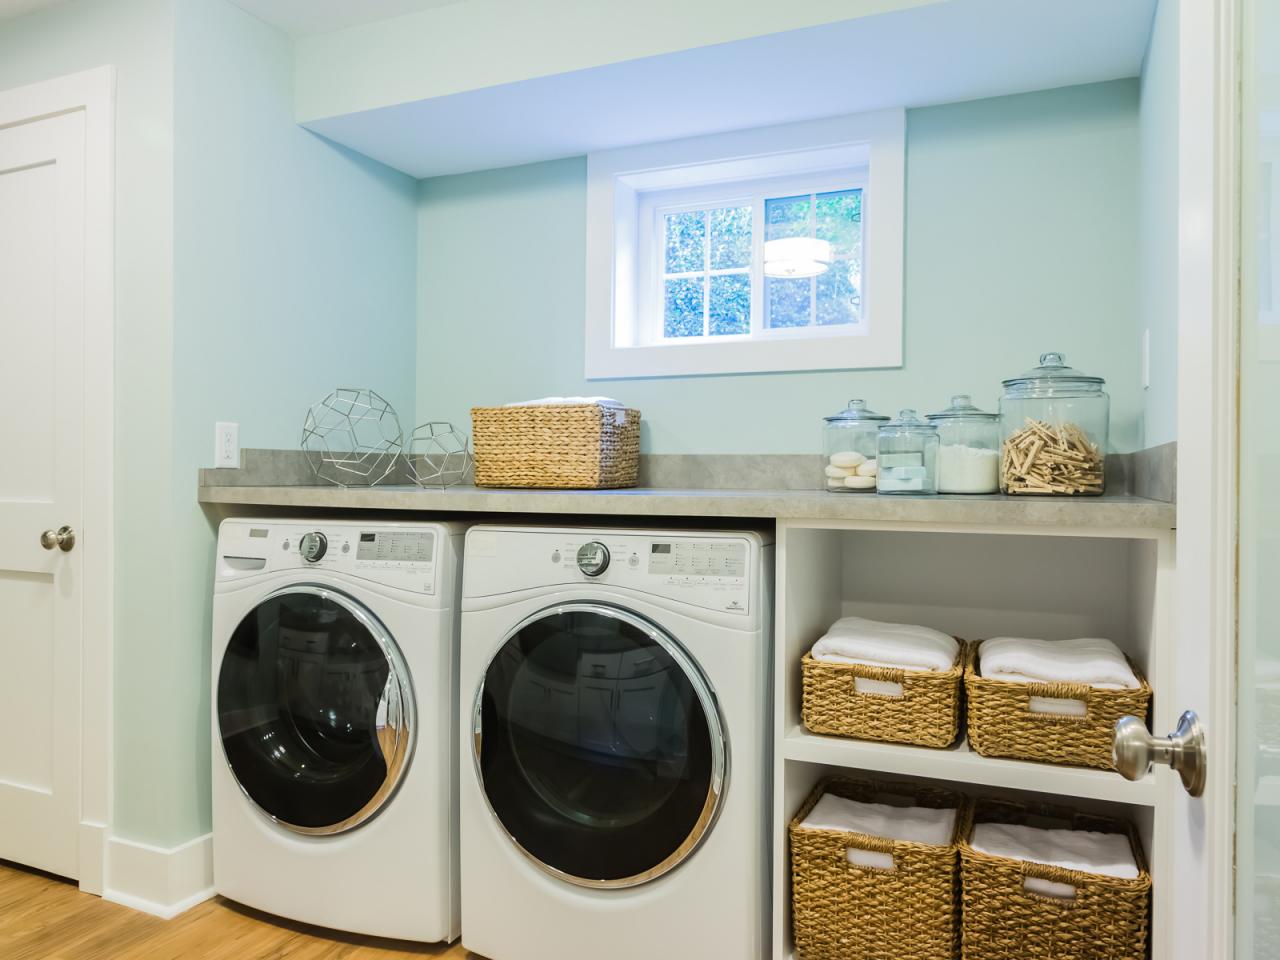 How To Make A Basement Laundry Room Look Nice | Storables